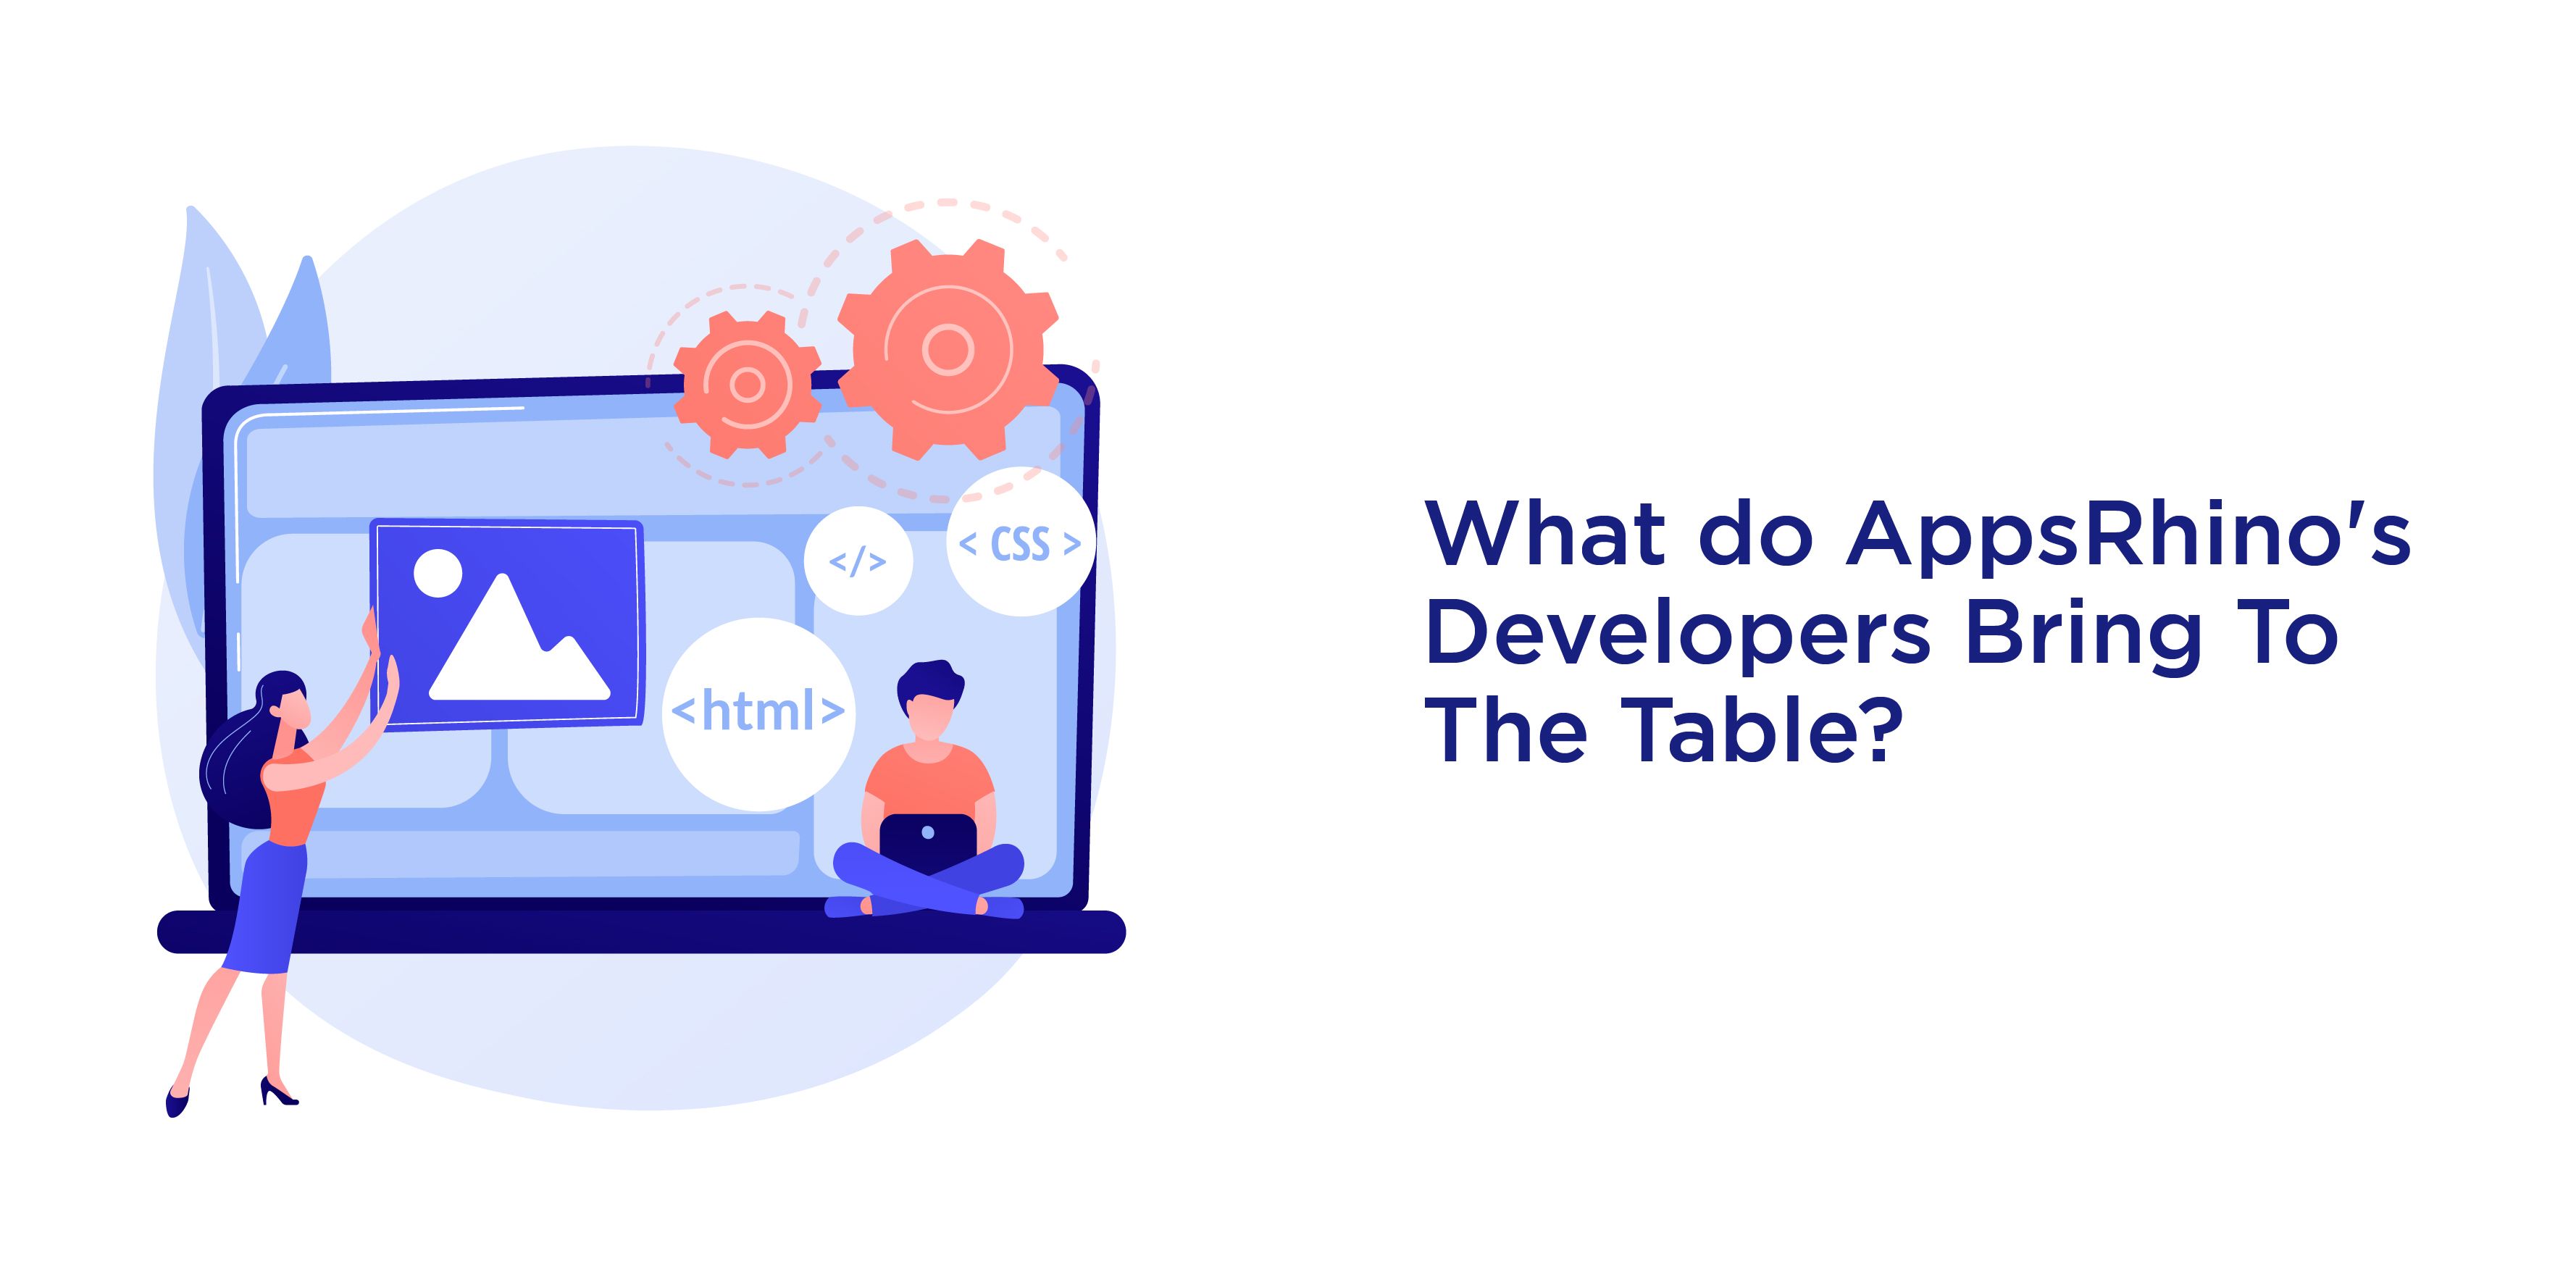 What do AppsRhino's Developers Bring To The Table?